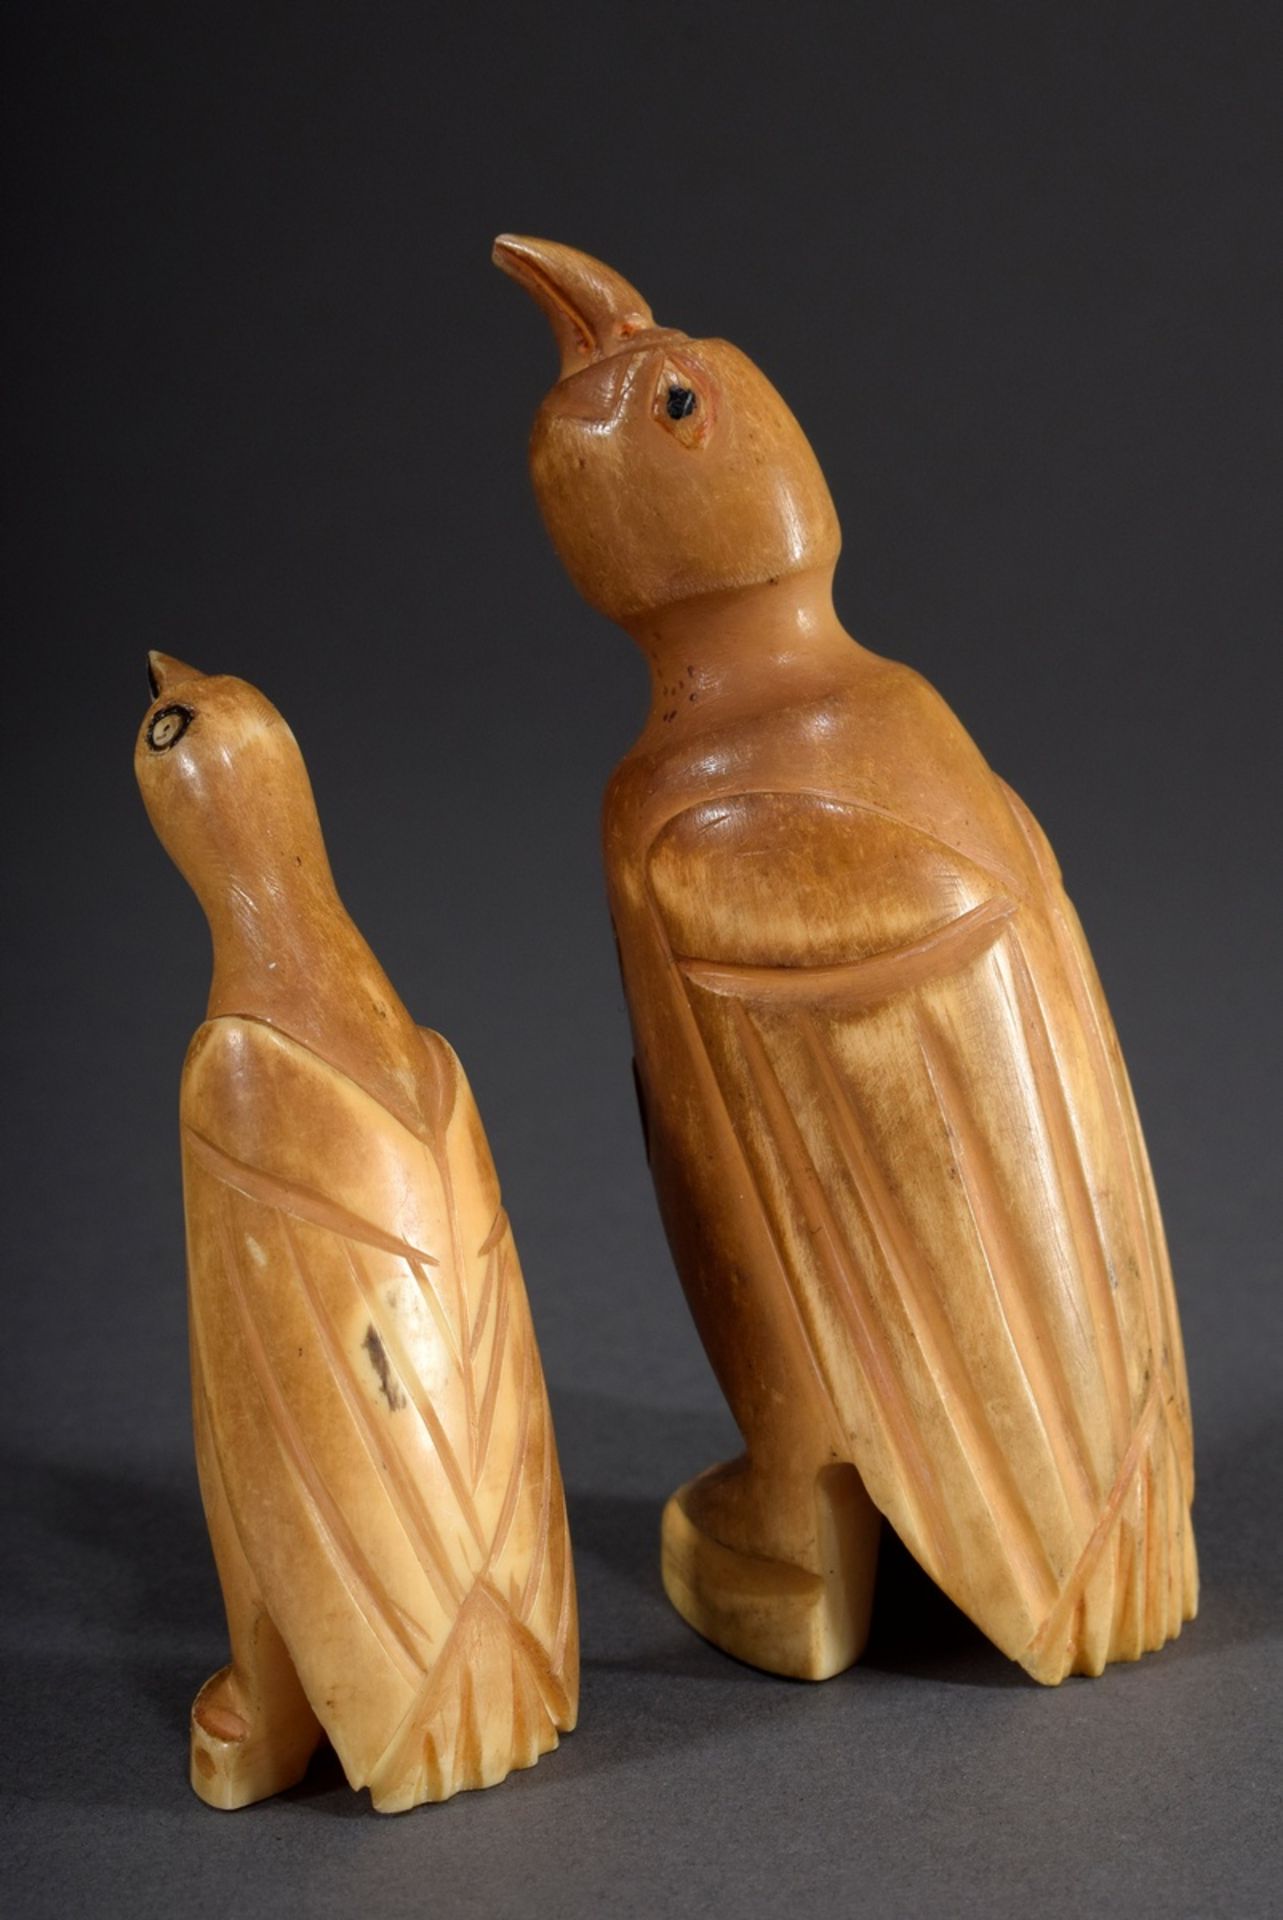 2 Diverse Walzahn Schnitzereien "Pinguine", Alas | 2 Various whale tooth carvings "Penguins", Alask - Image 2 of 4